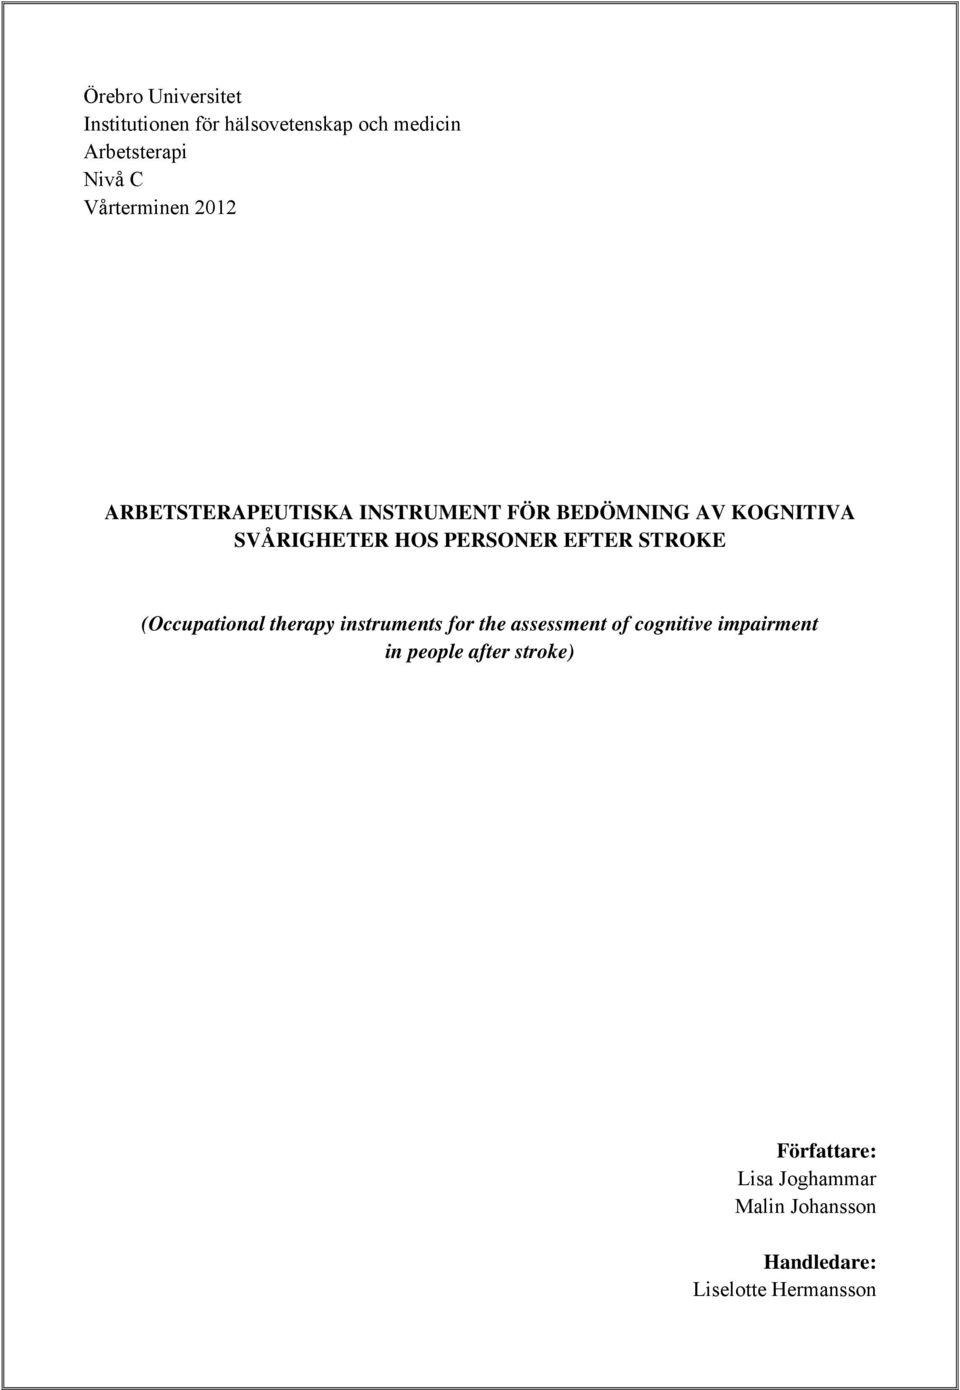 PERSONER EFTER STROKE (Occupational therapy instruments for the assessment of cognitive